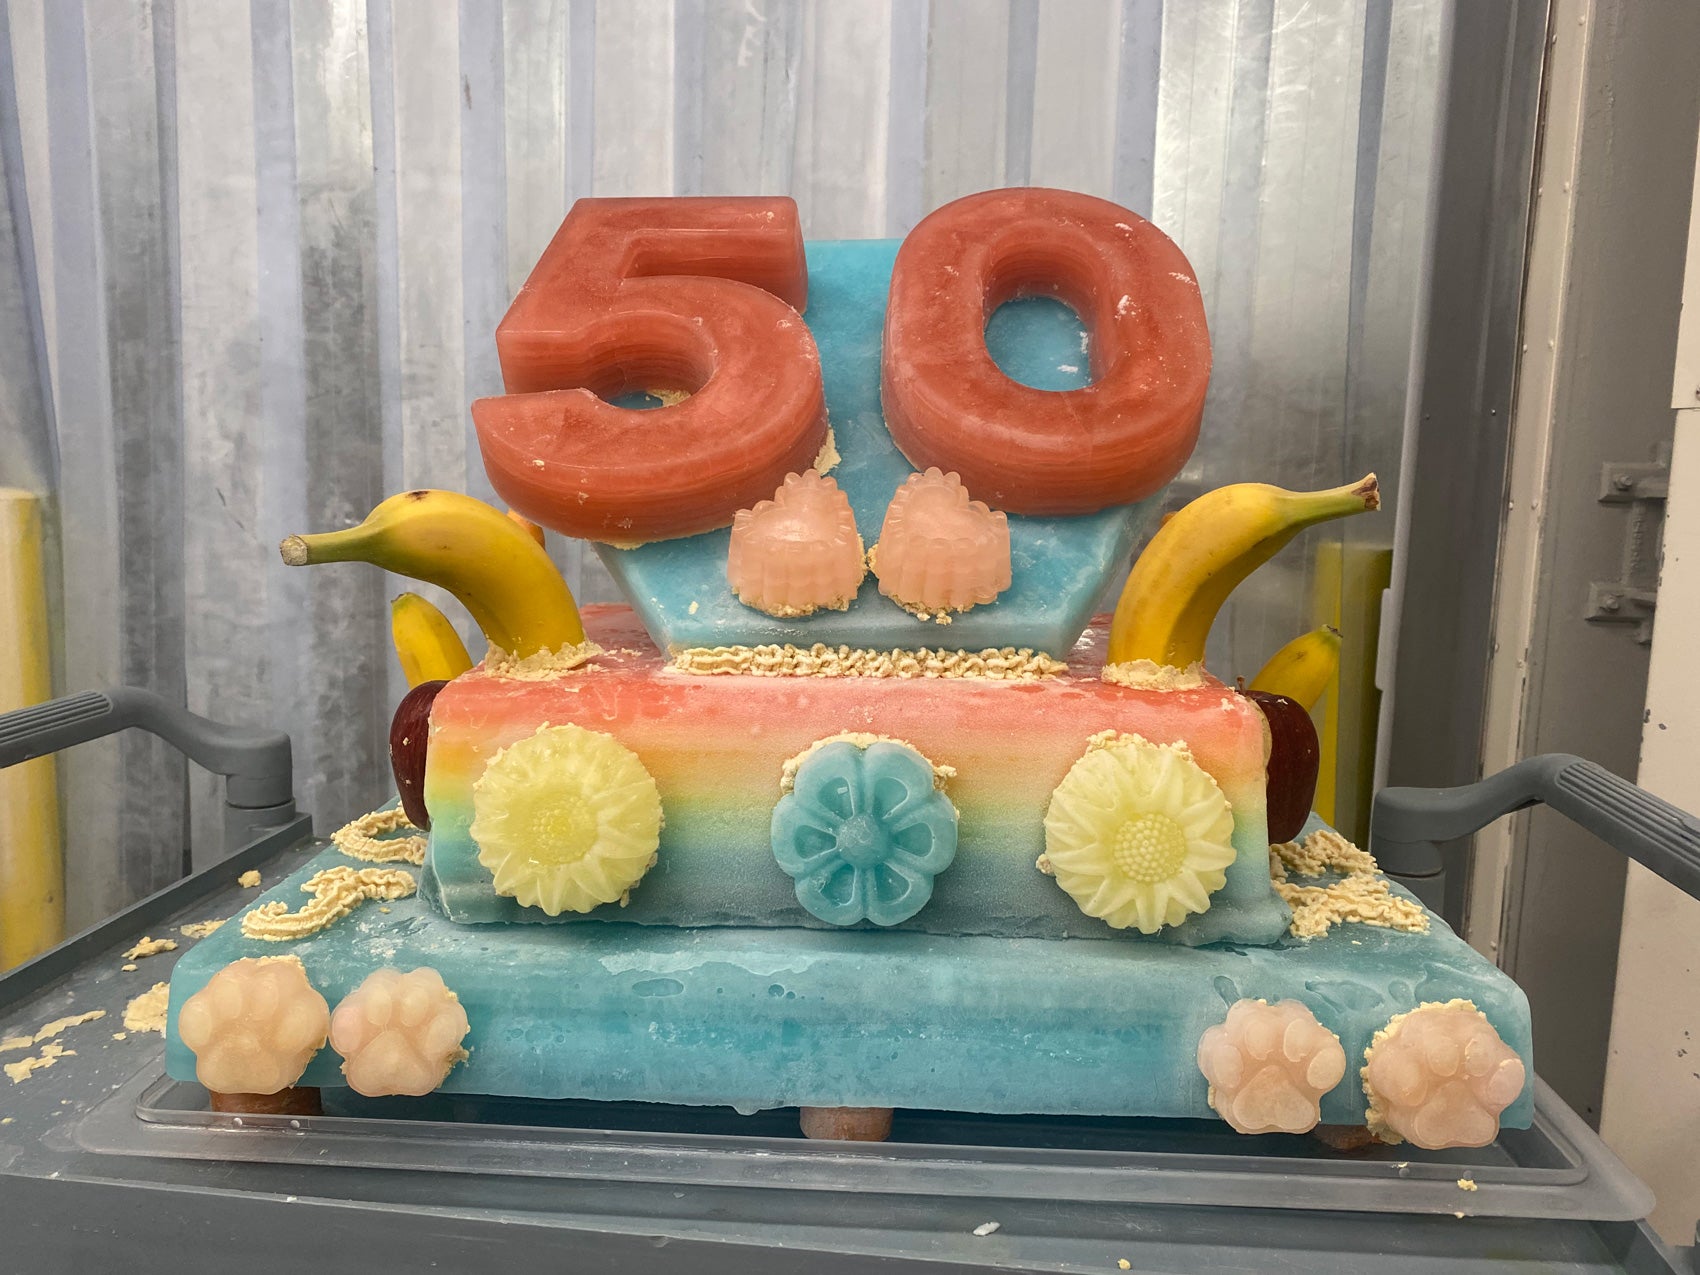 A three-tiered, colorful frozen ice cake with fresh produce and frozen decorations shaped like paws, flowers, suns, and the number 50